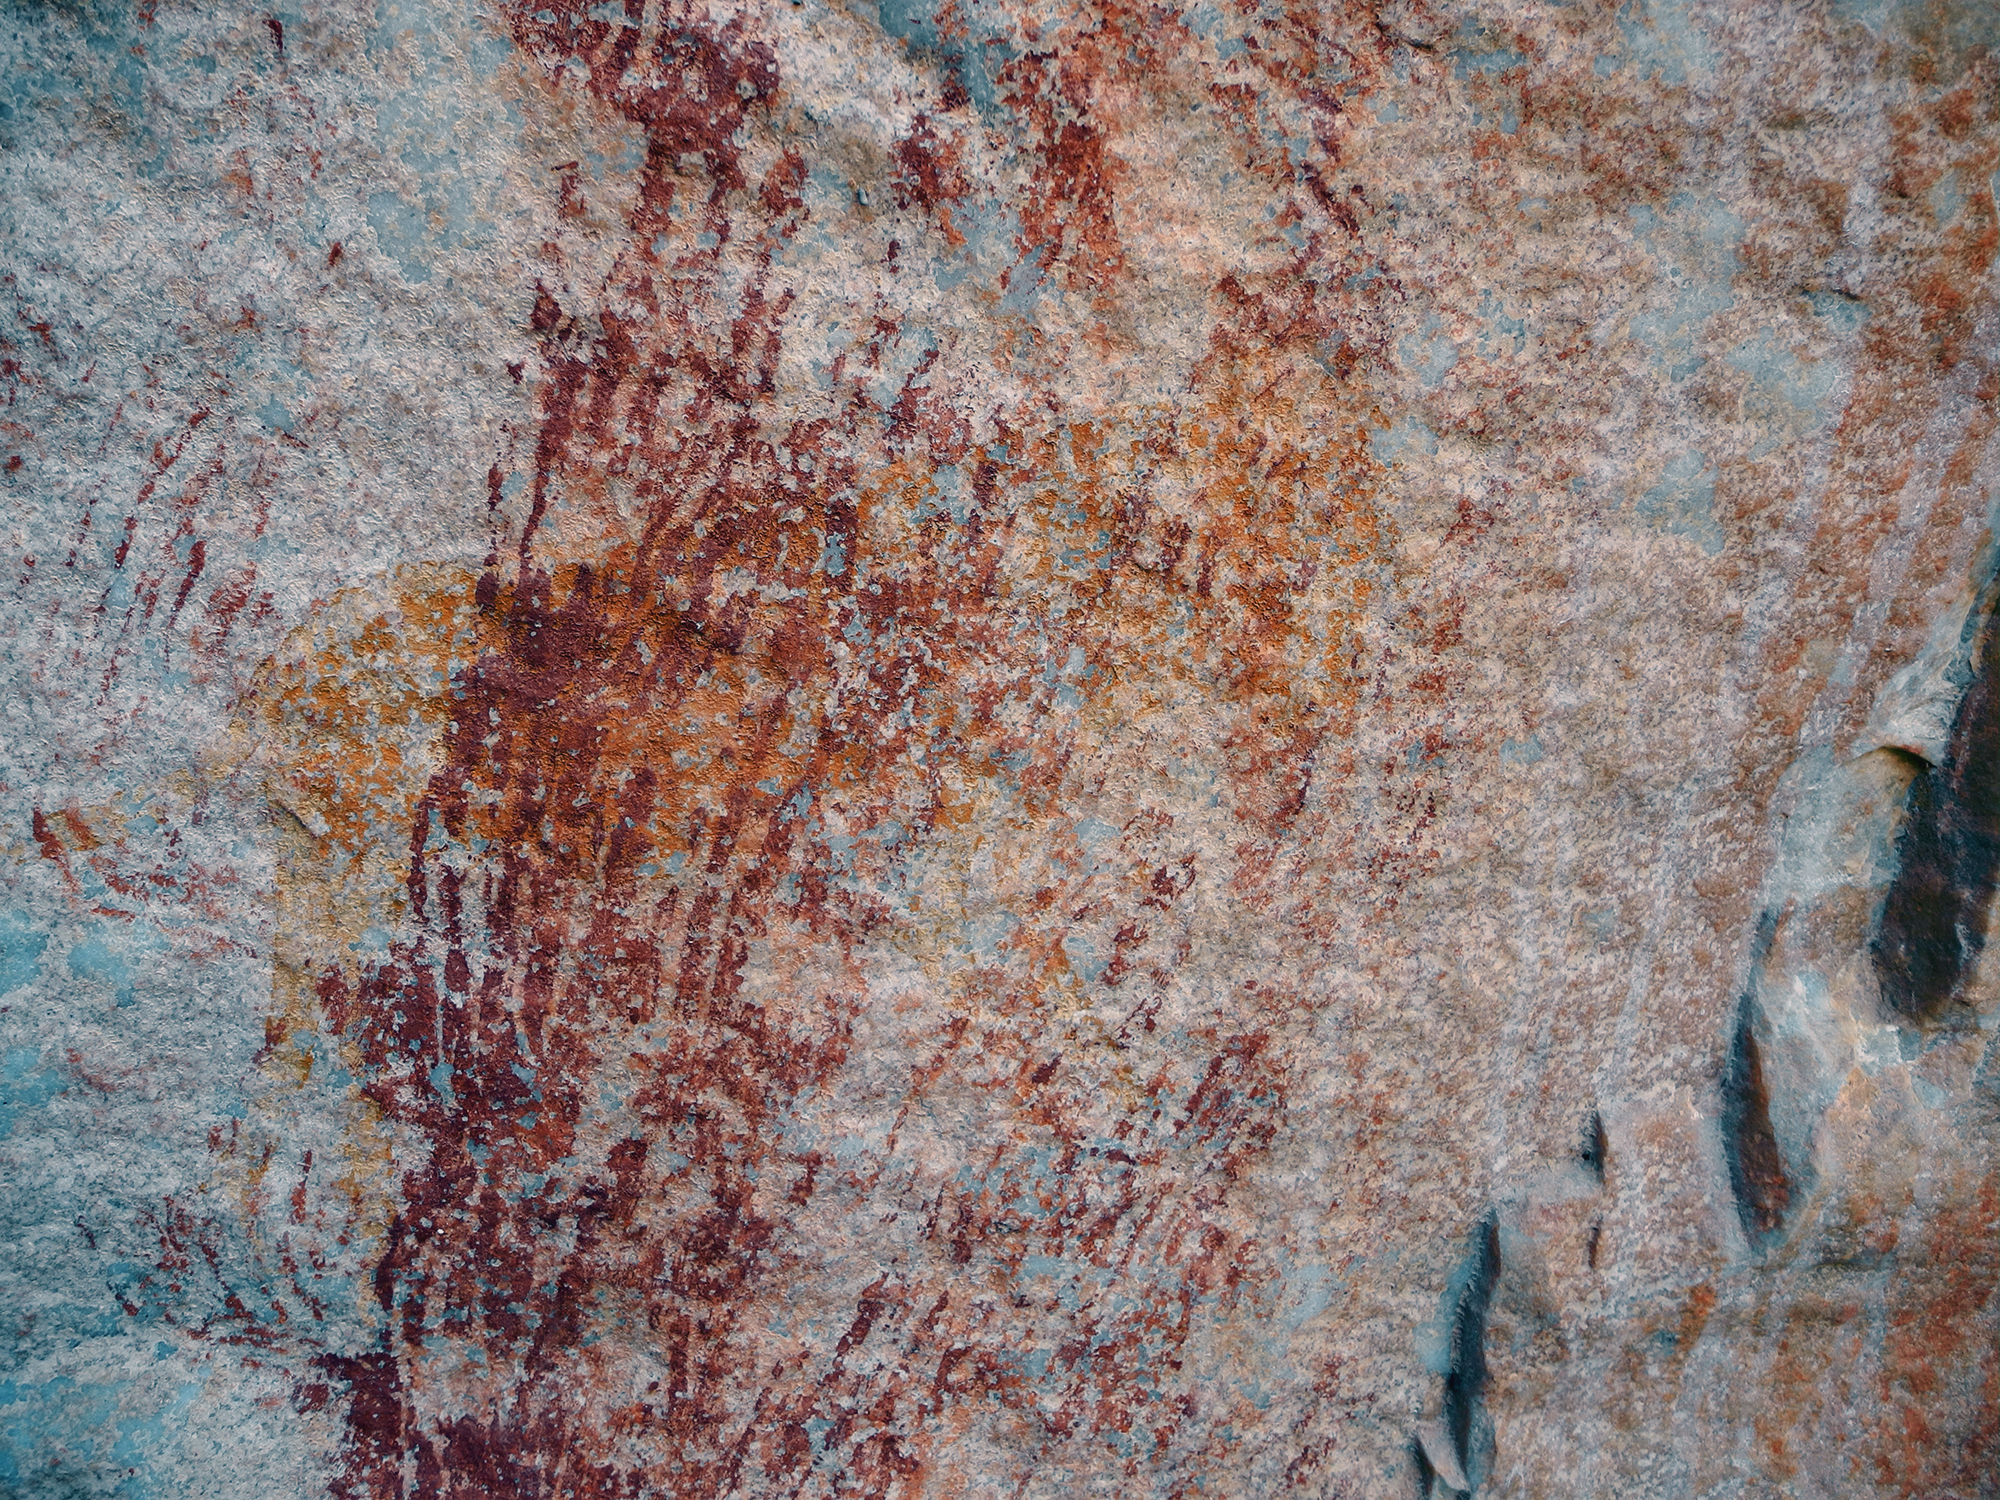 Rock Art Handprints with extended fingers superimposed over a yellow feline, Swartkop, Ceres Karoo Archaeology South Africa